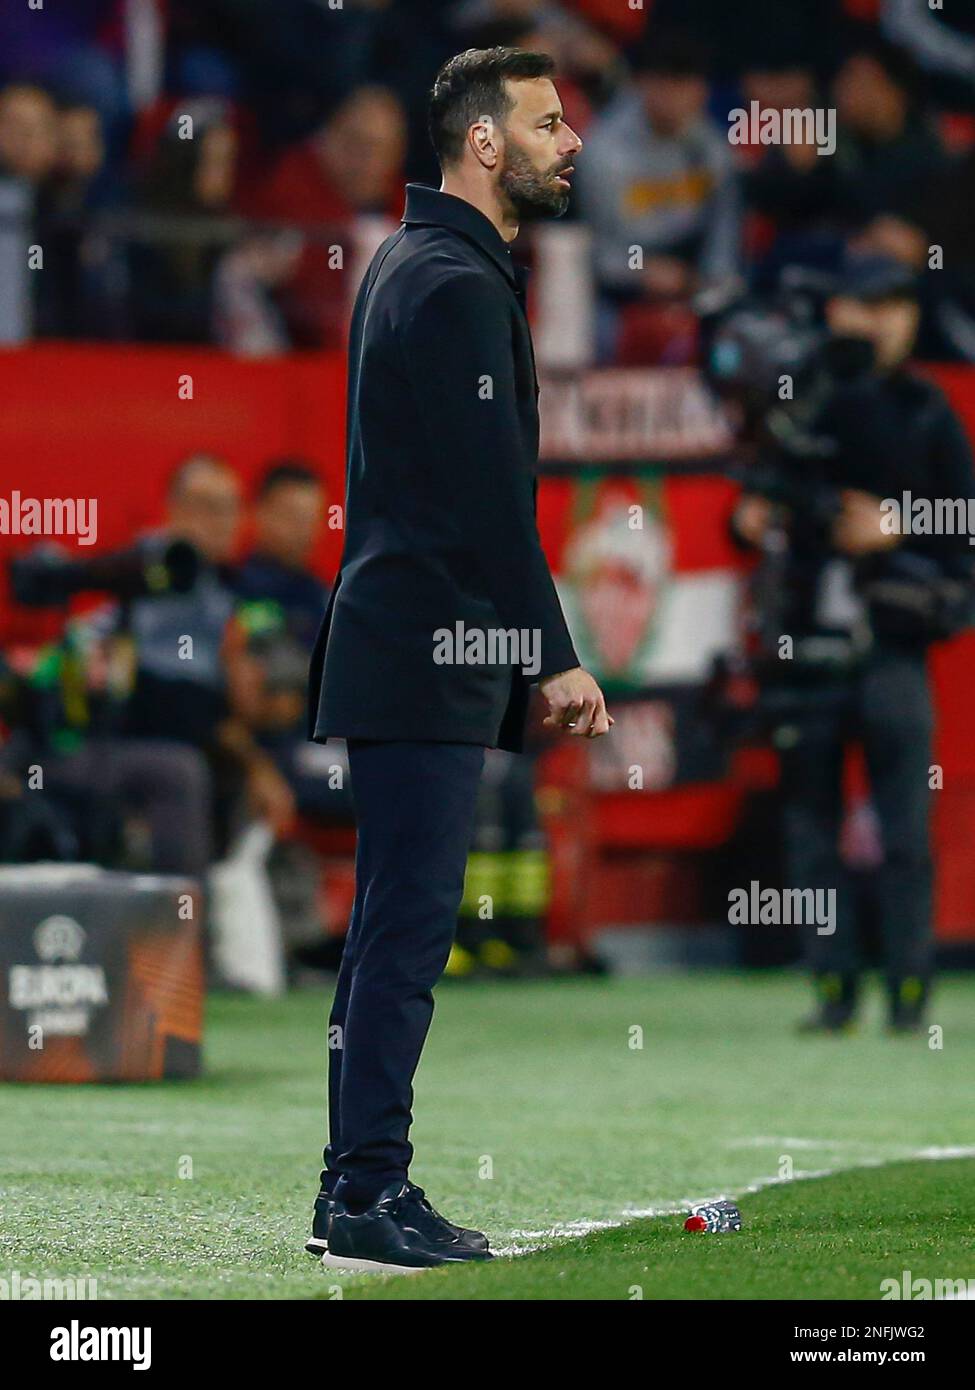 PSV Eindhoven head coach Ruud van Nistelrooy during the UEFA Europa League match, Play-off, 1st leg between Sevilla FC and PSV Eindhoven played at Ramon Sanchez Pizjuan Stadium on February 16, 2023 in Sevilla, Spain. (Photo by Antonio Pozo / PRESSIN) Stock Photo